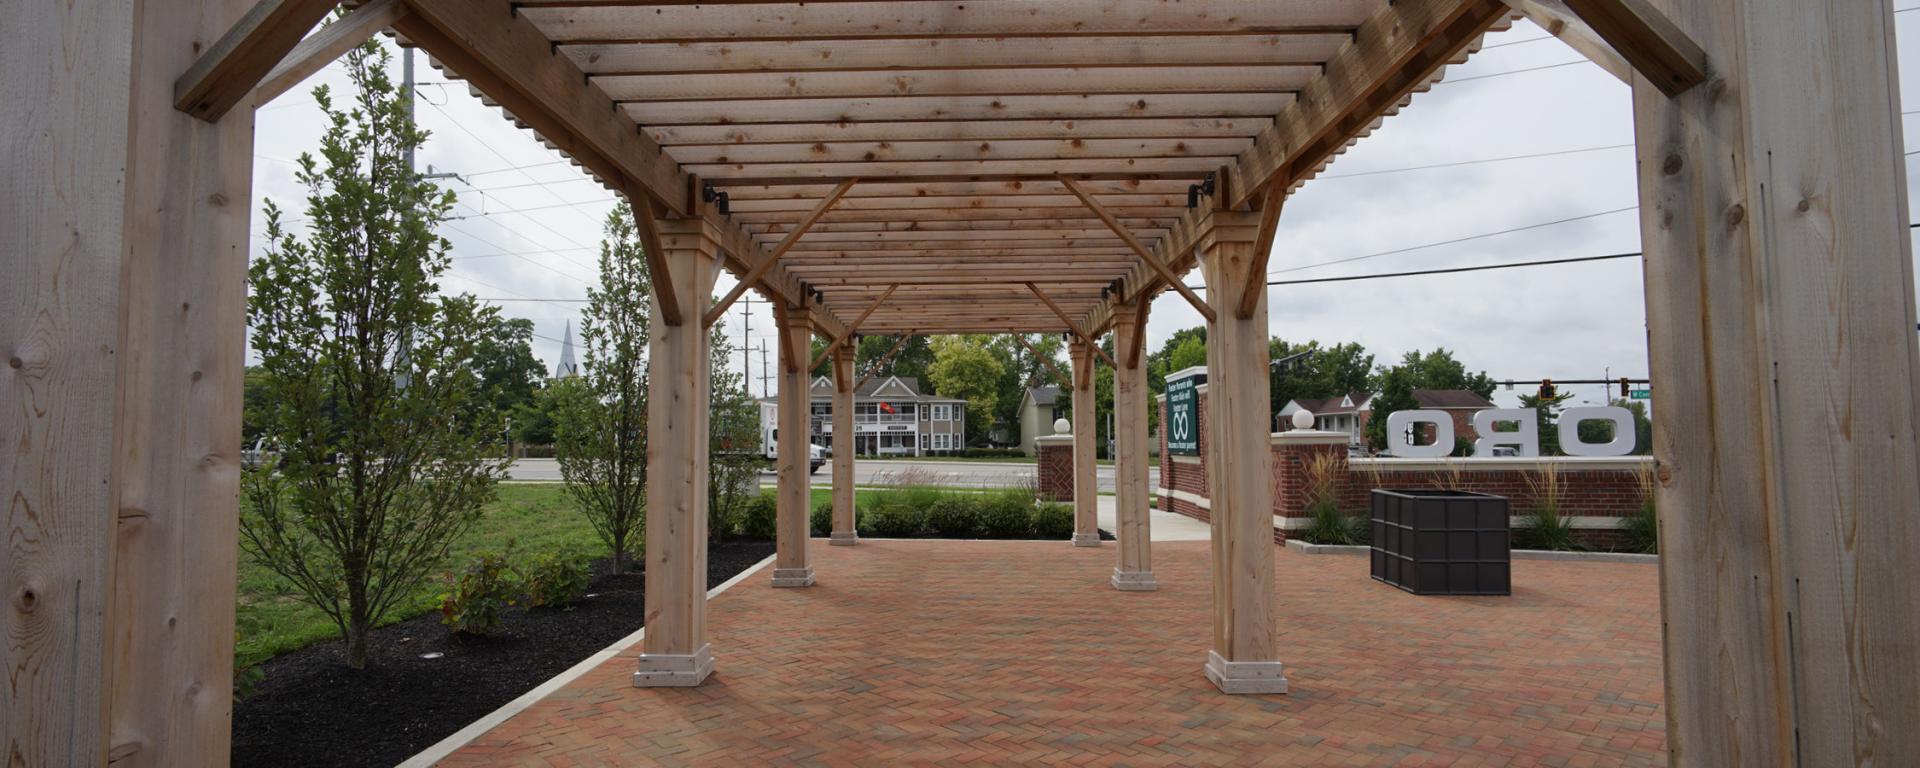 wooden pergola structure with green trees outside